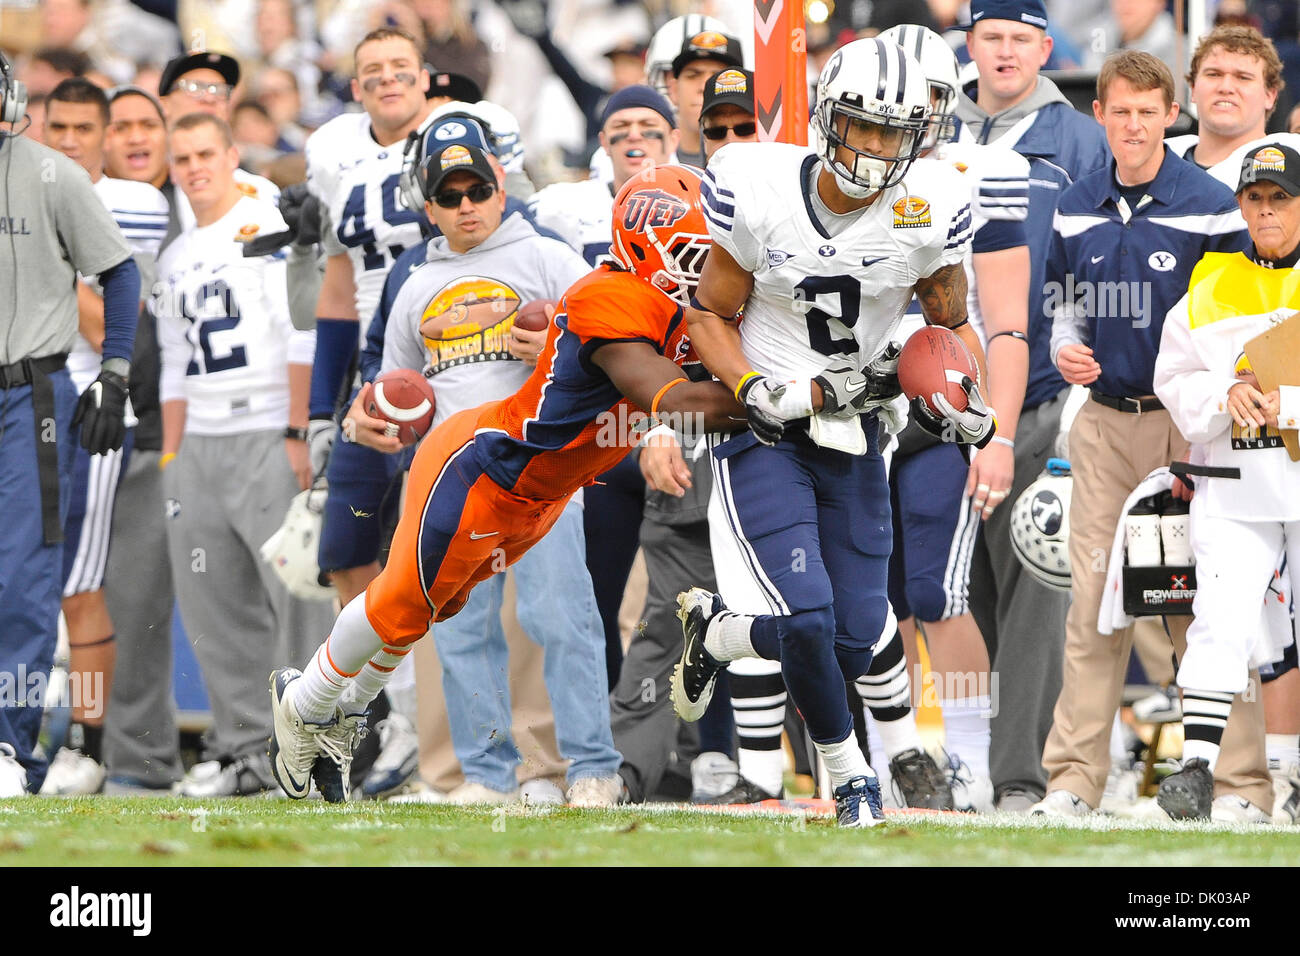 Dec. 18, 2010 - Albuquerque, New Mexico, United States of America - BYU WR Cody Hoffman (2) gets tackled by UTEP CB Travaun Nixon (5). BYU leads UTEP 31-10 at the half of the New Mexico Bowl at University Stadium. (Credit Image: © Andrew Fielding/Southcreek Global/ZUMAPRESS.com) Stock Photo